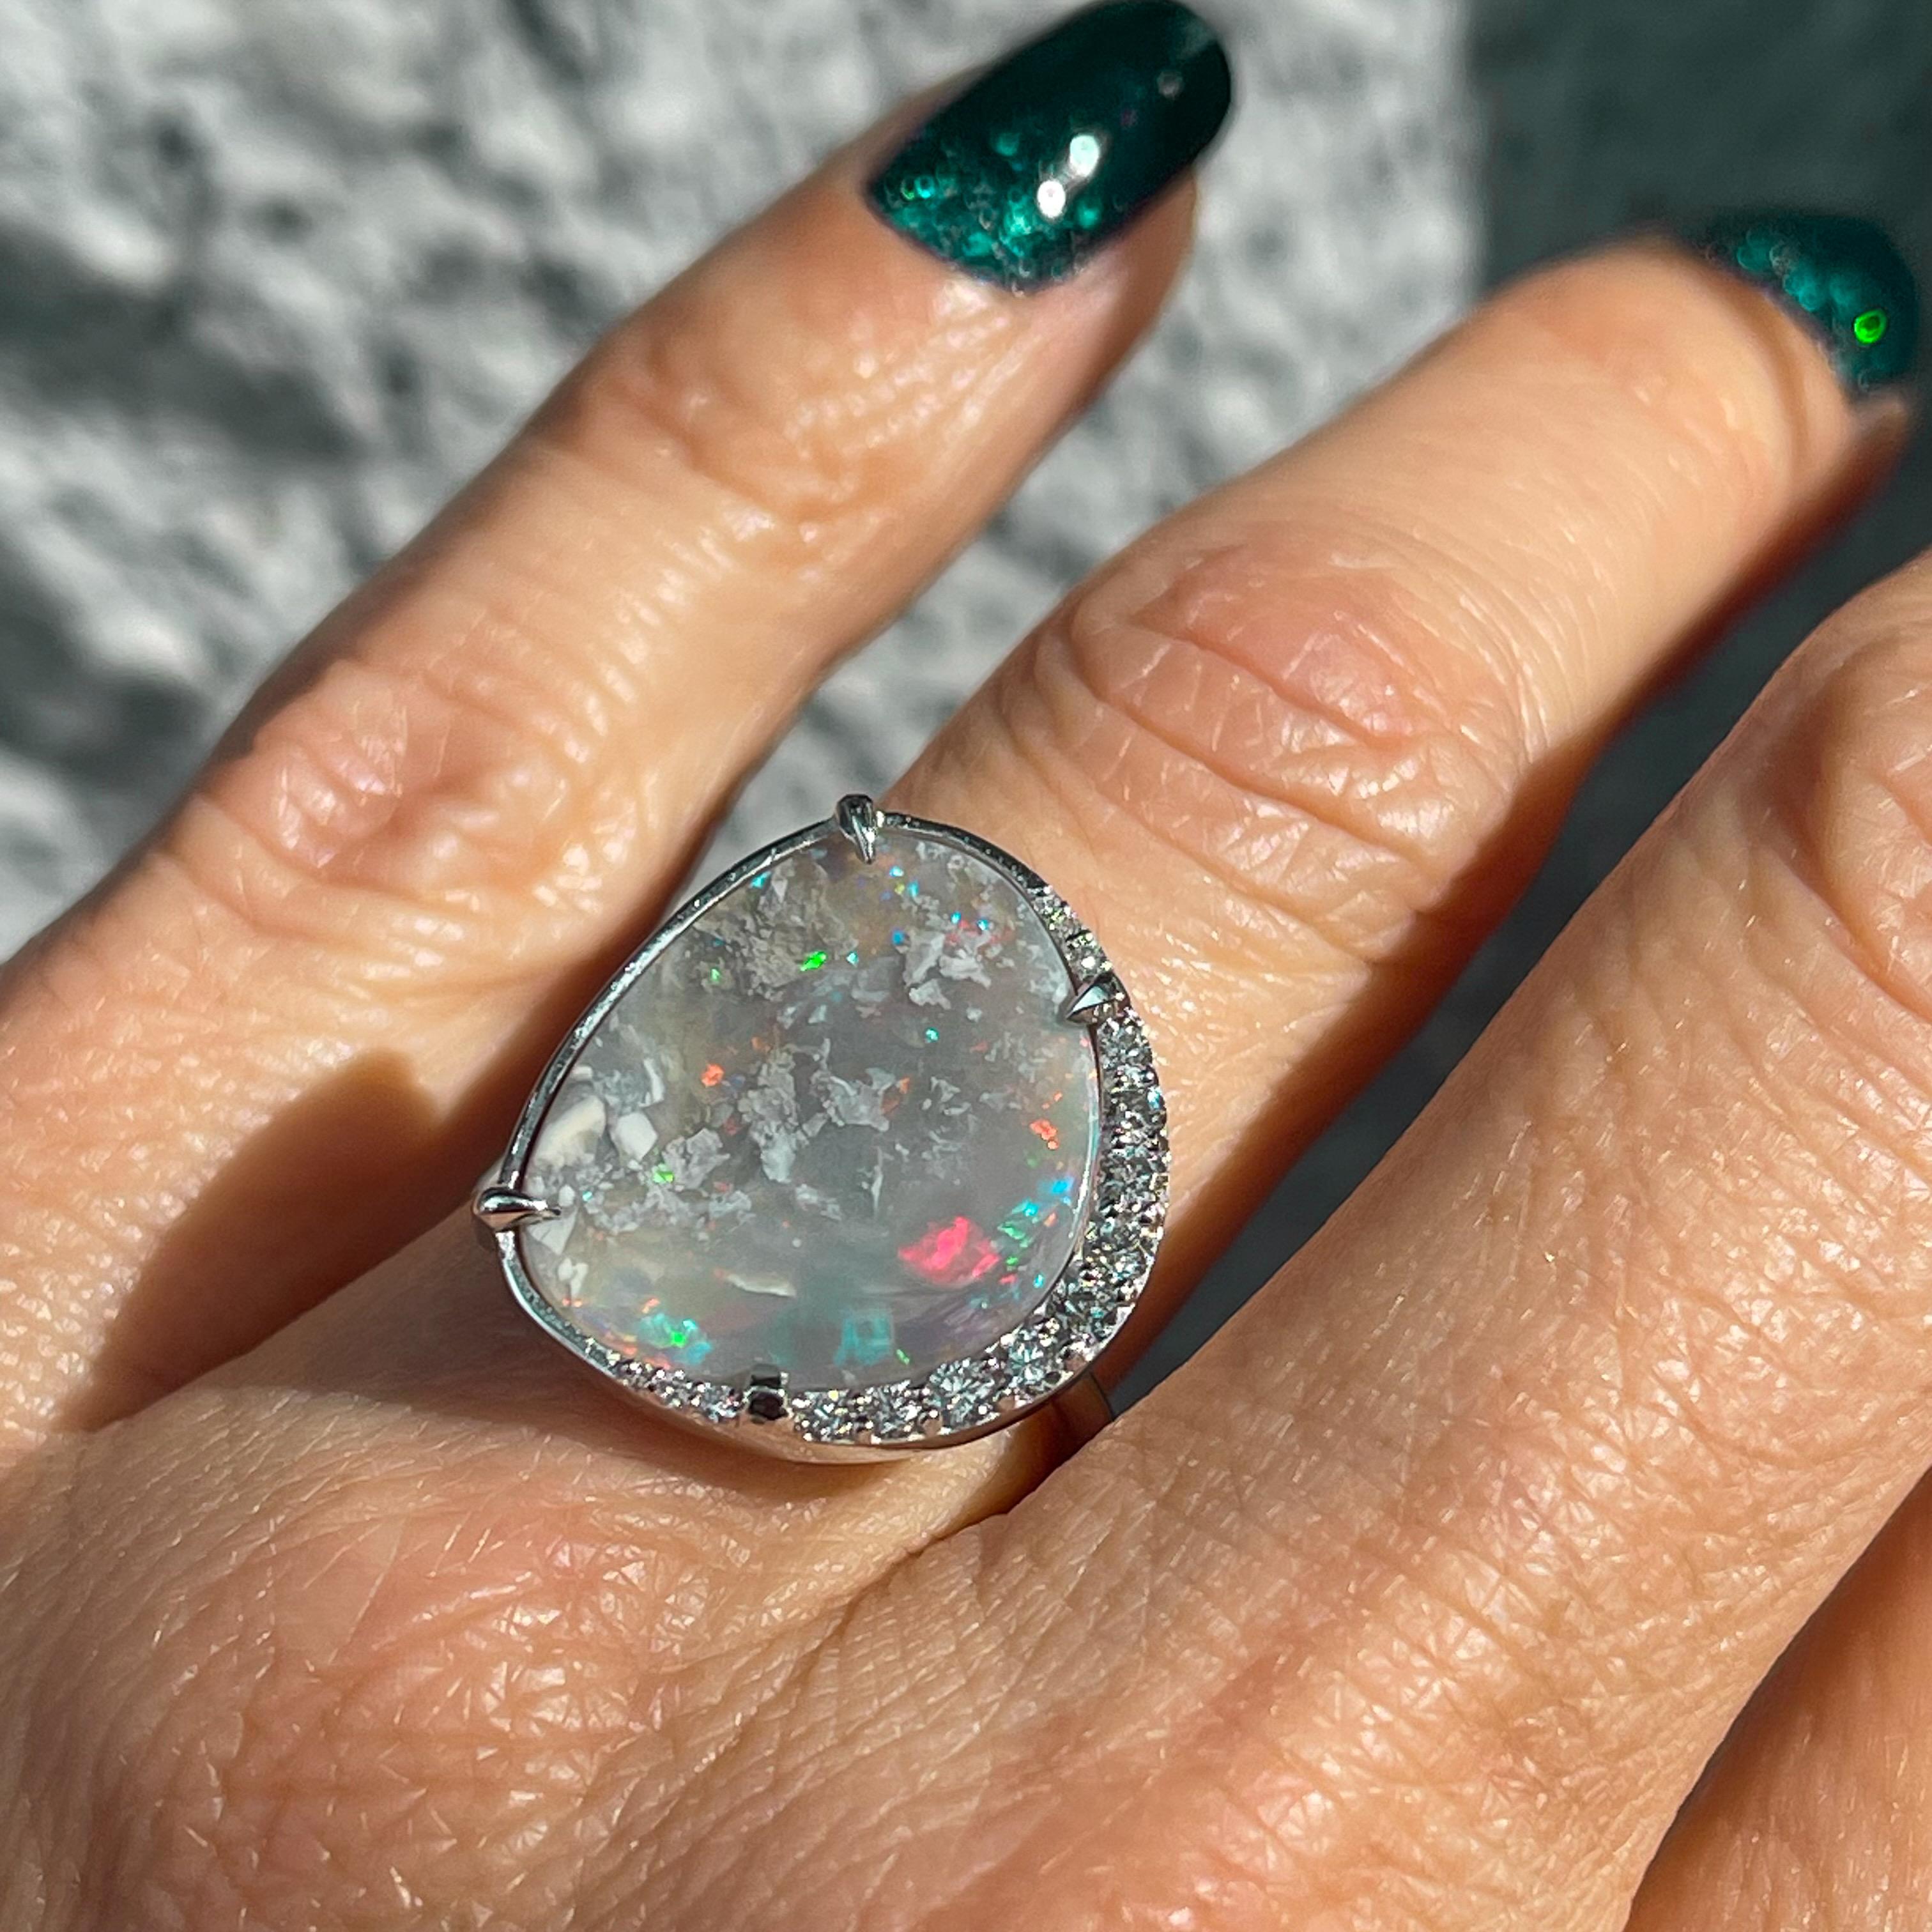 True Colors Australian Opal Ring with Diamonds in White Gold by NIXIN Jewelry In New Condition For Sale In Los Angeles, CA